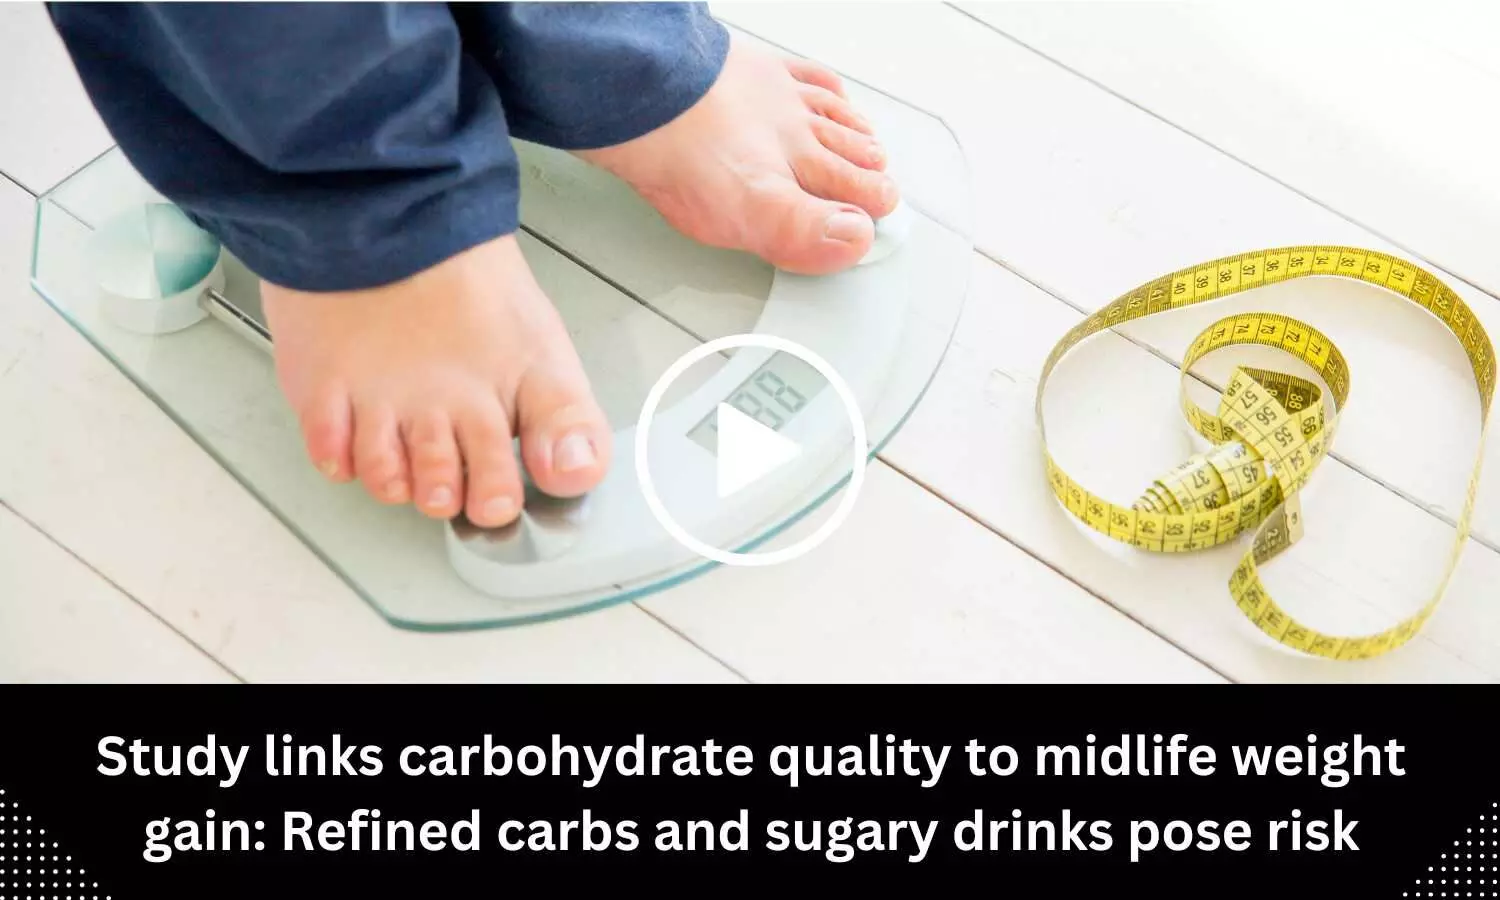 Study links carbohydrate quality to midlife weight gain: Refined carbs and sugary drinks pose risk